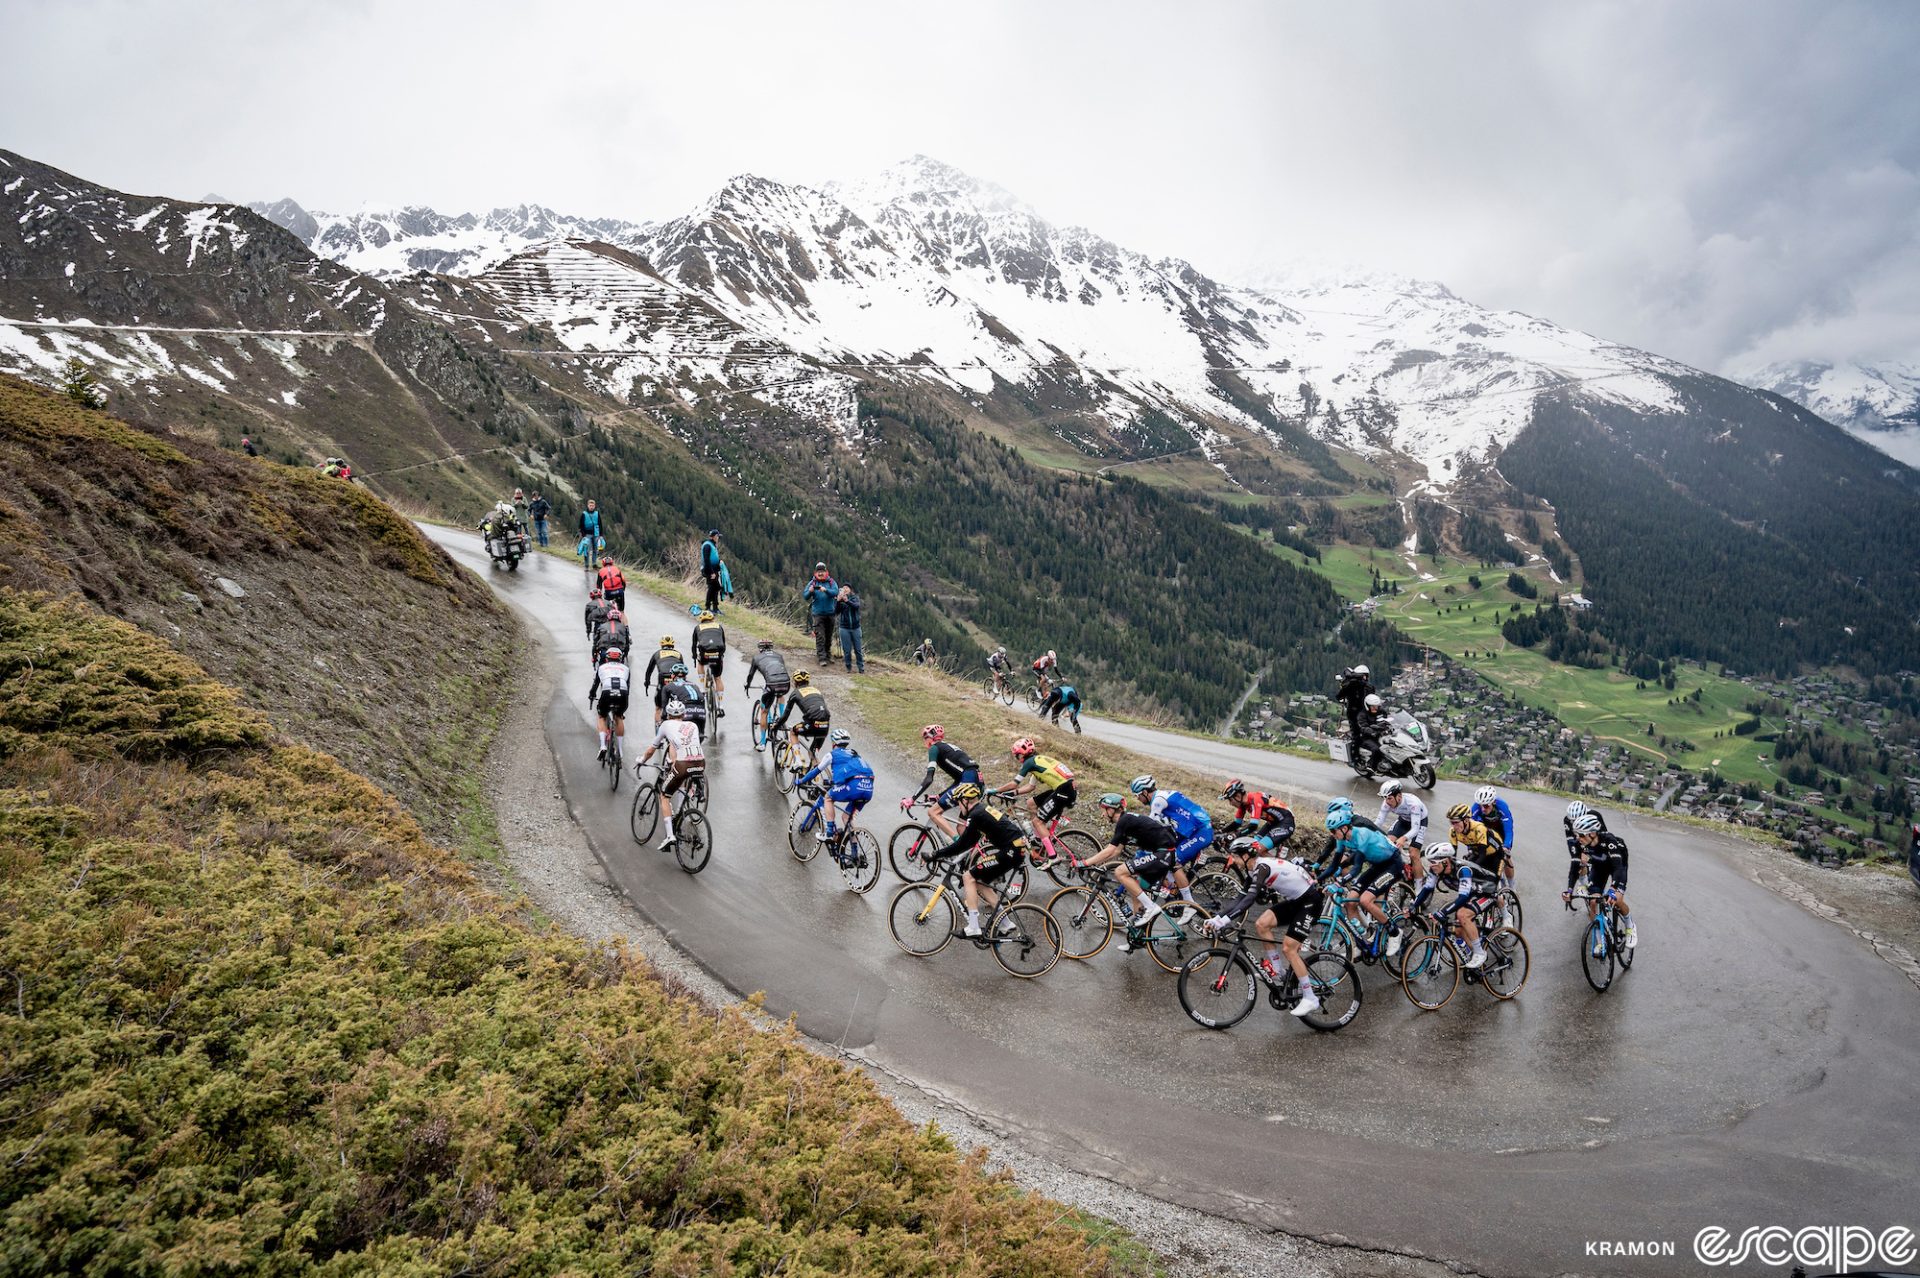 A cold, wet pack of riders climbs a switchback on the Croix de Coeur climb in the Giro d'Italia. Grey skies and snowy mountains loom beyond.